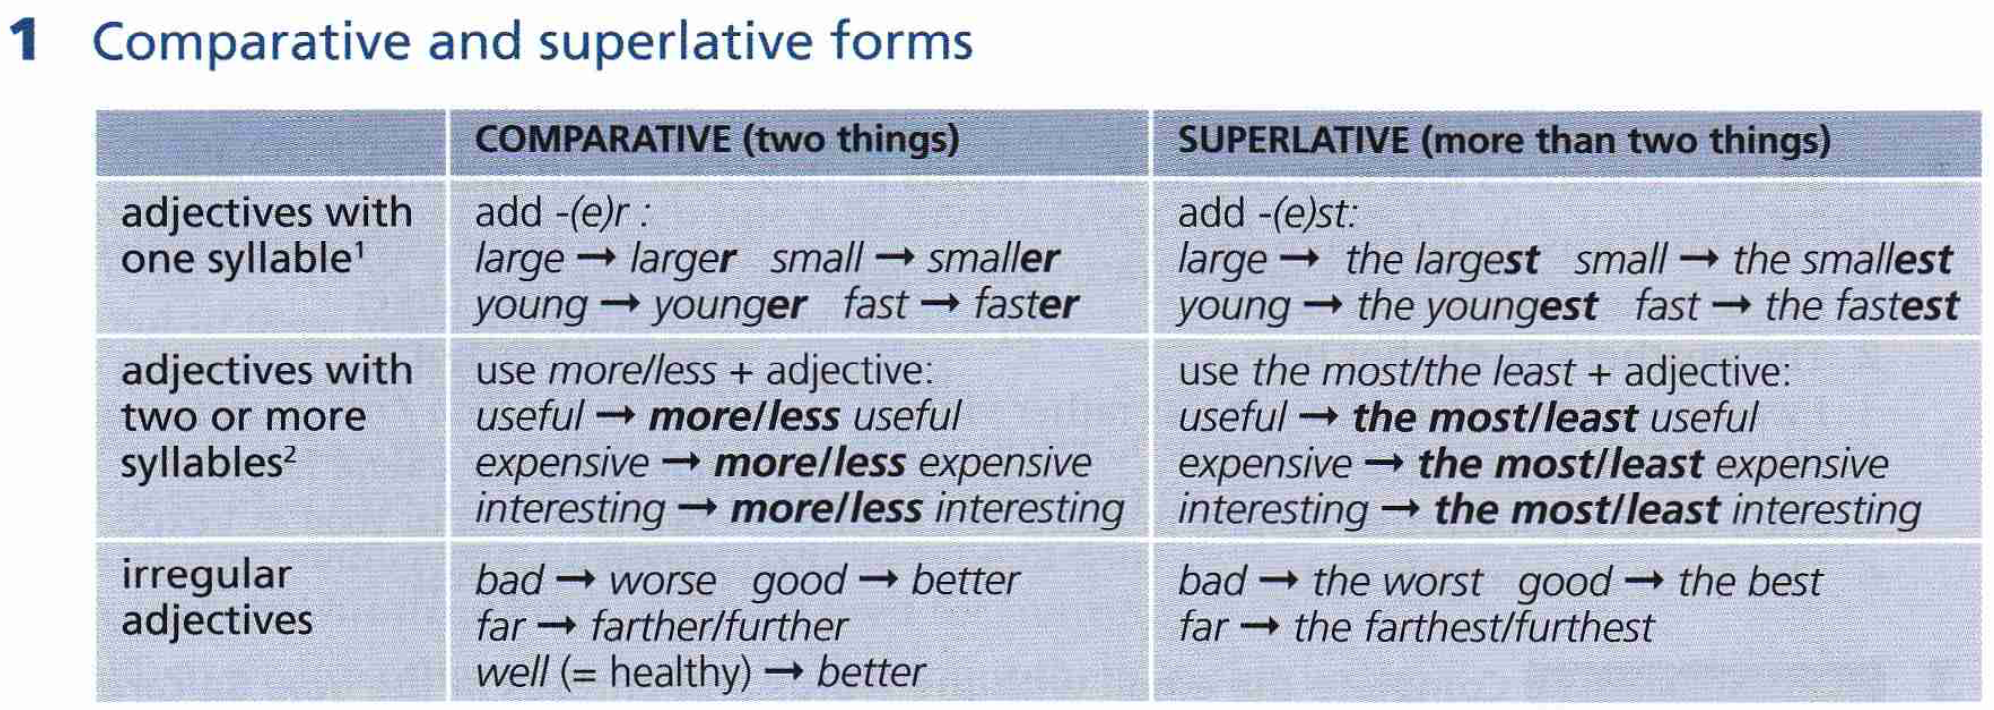 Slow comparative. Comparatives and Superlatives правило. Таблица Comparative and Superlative. Comparative and Superlative adjectives правило. Degrees of Comparison of adjectives таблица.